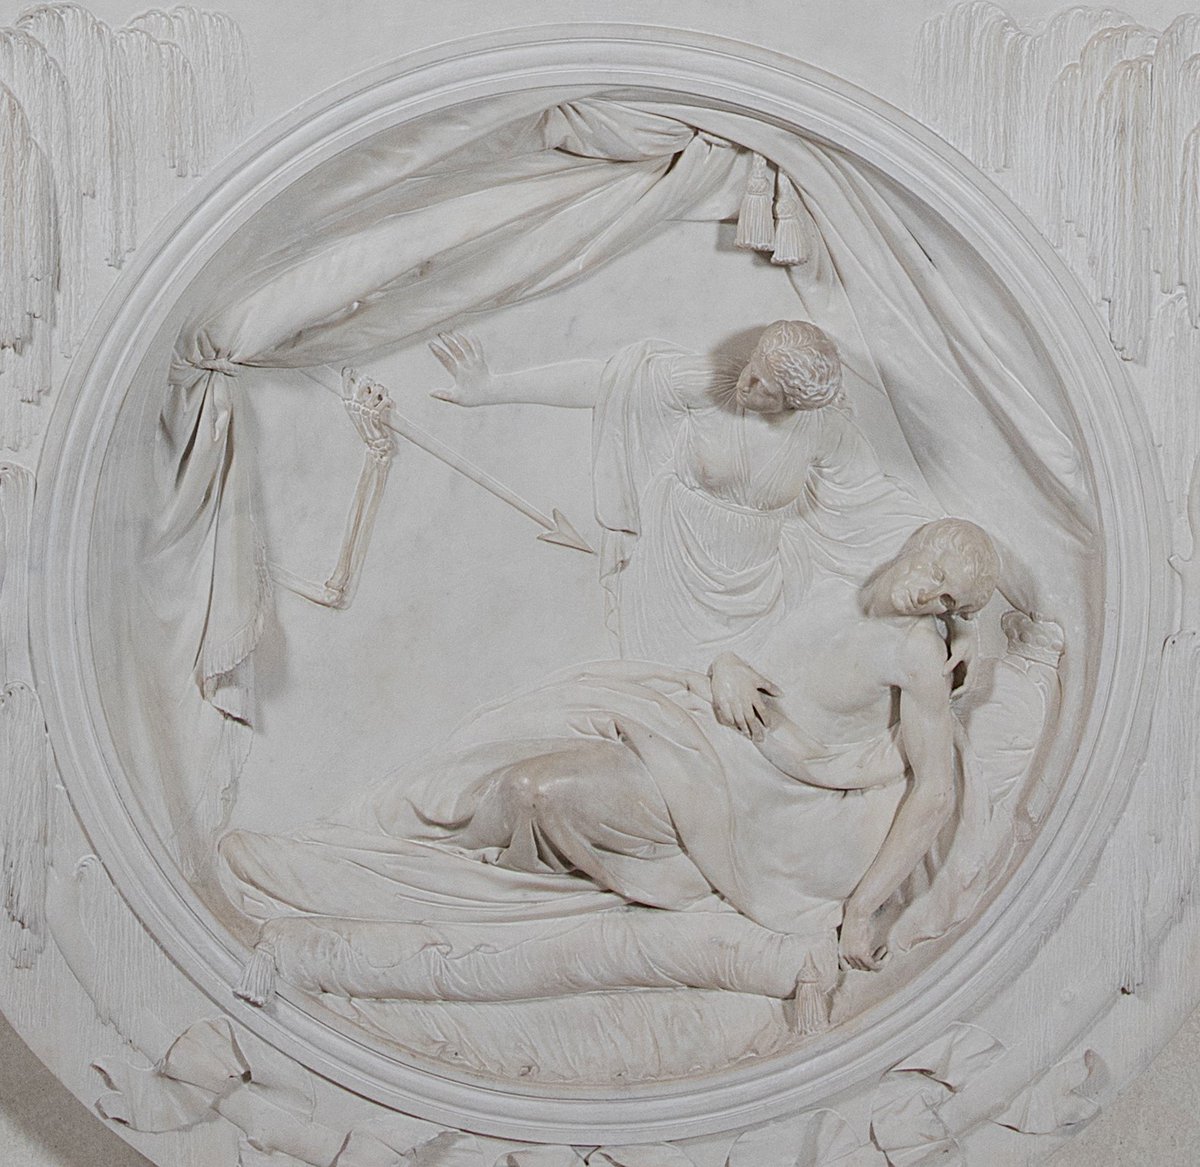 Speaking of graves... here's a creepy detail from our Tracton Memorial (1788) by sculptor John Bacon. A skeletal arm and hand emerge from behind the framing drapery and direct Death's arrow at the individual who is being memorialised: James Dennis, 1st Baron Tracton.